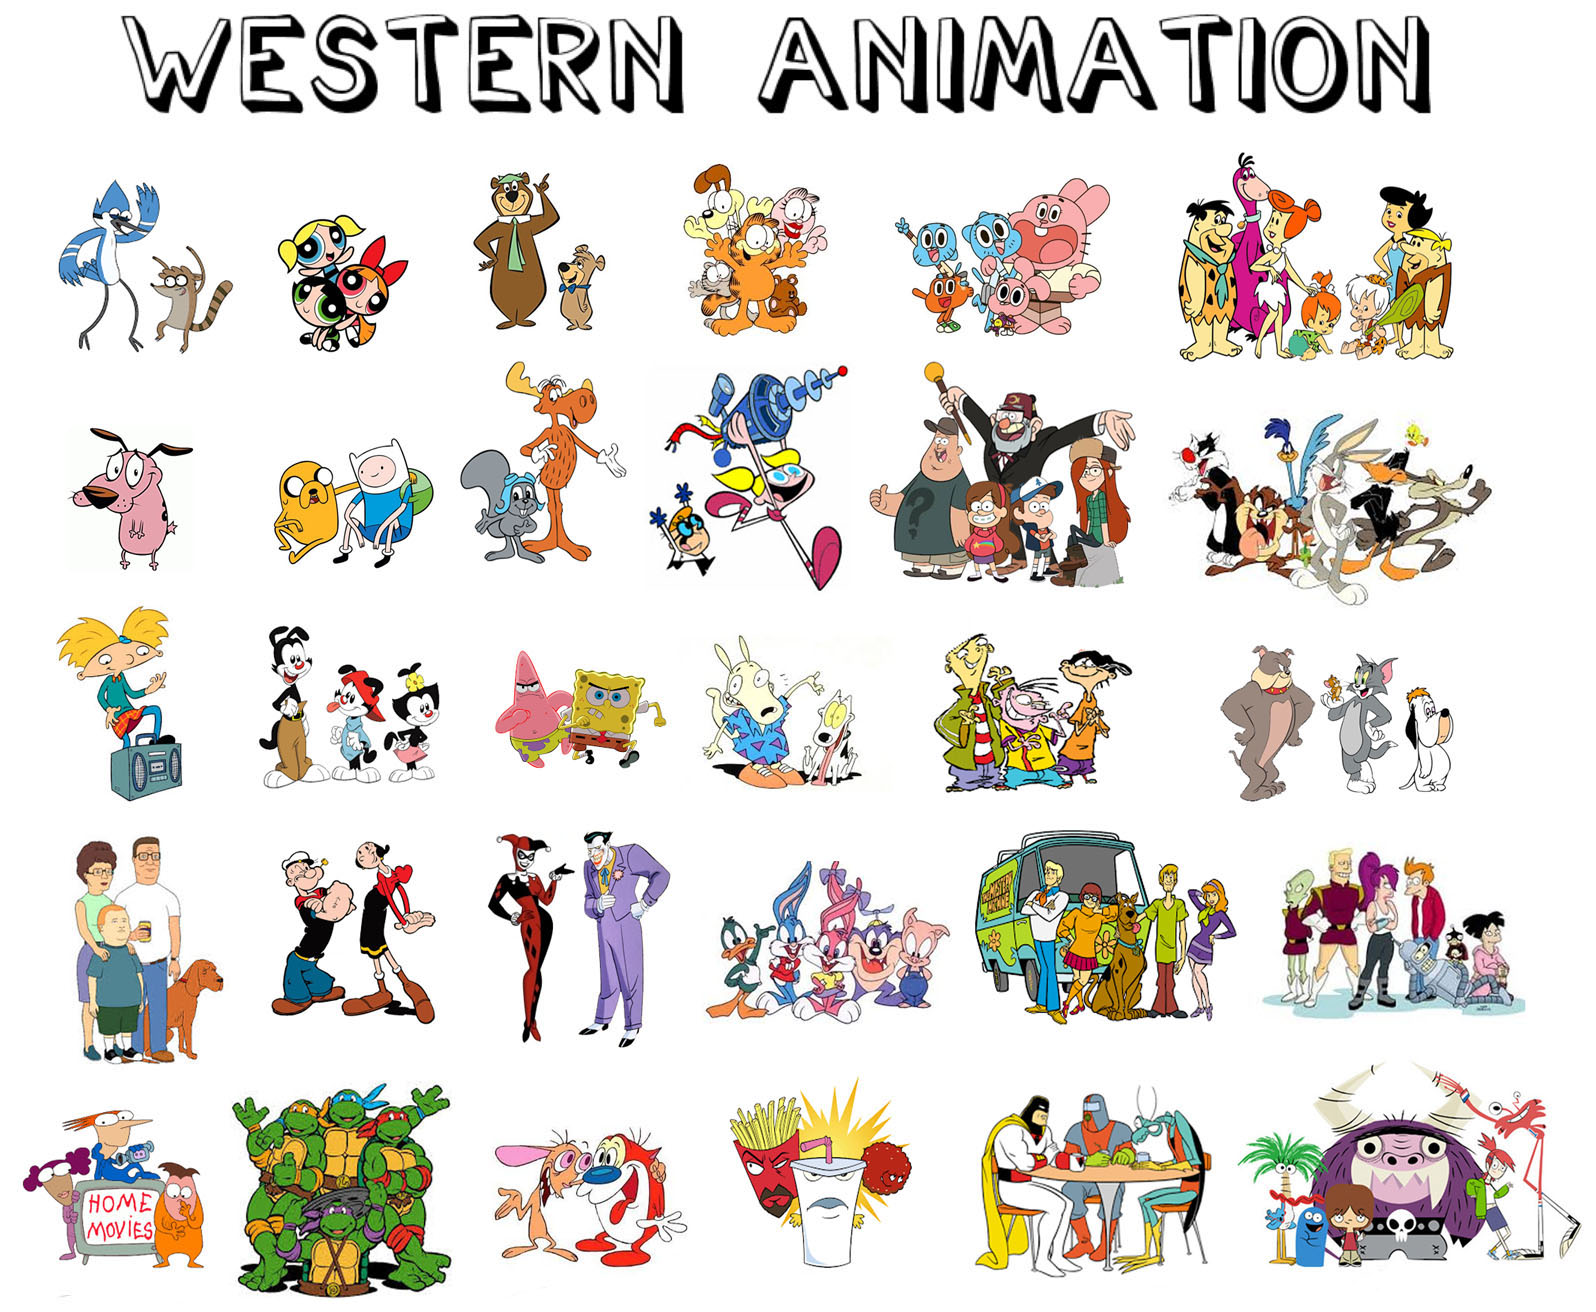 examples of different western animation shows